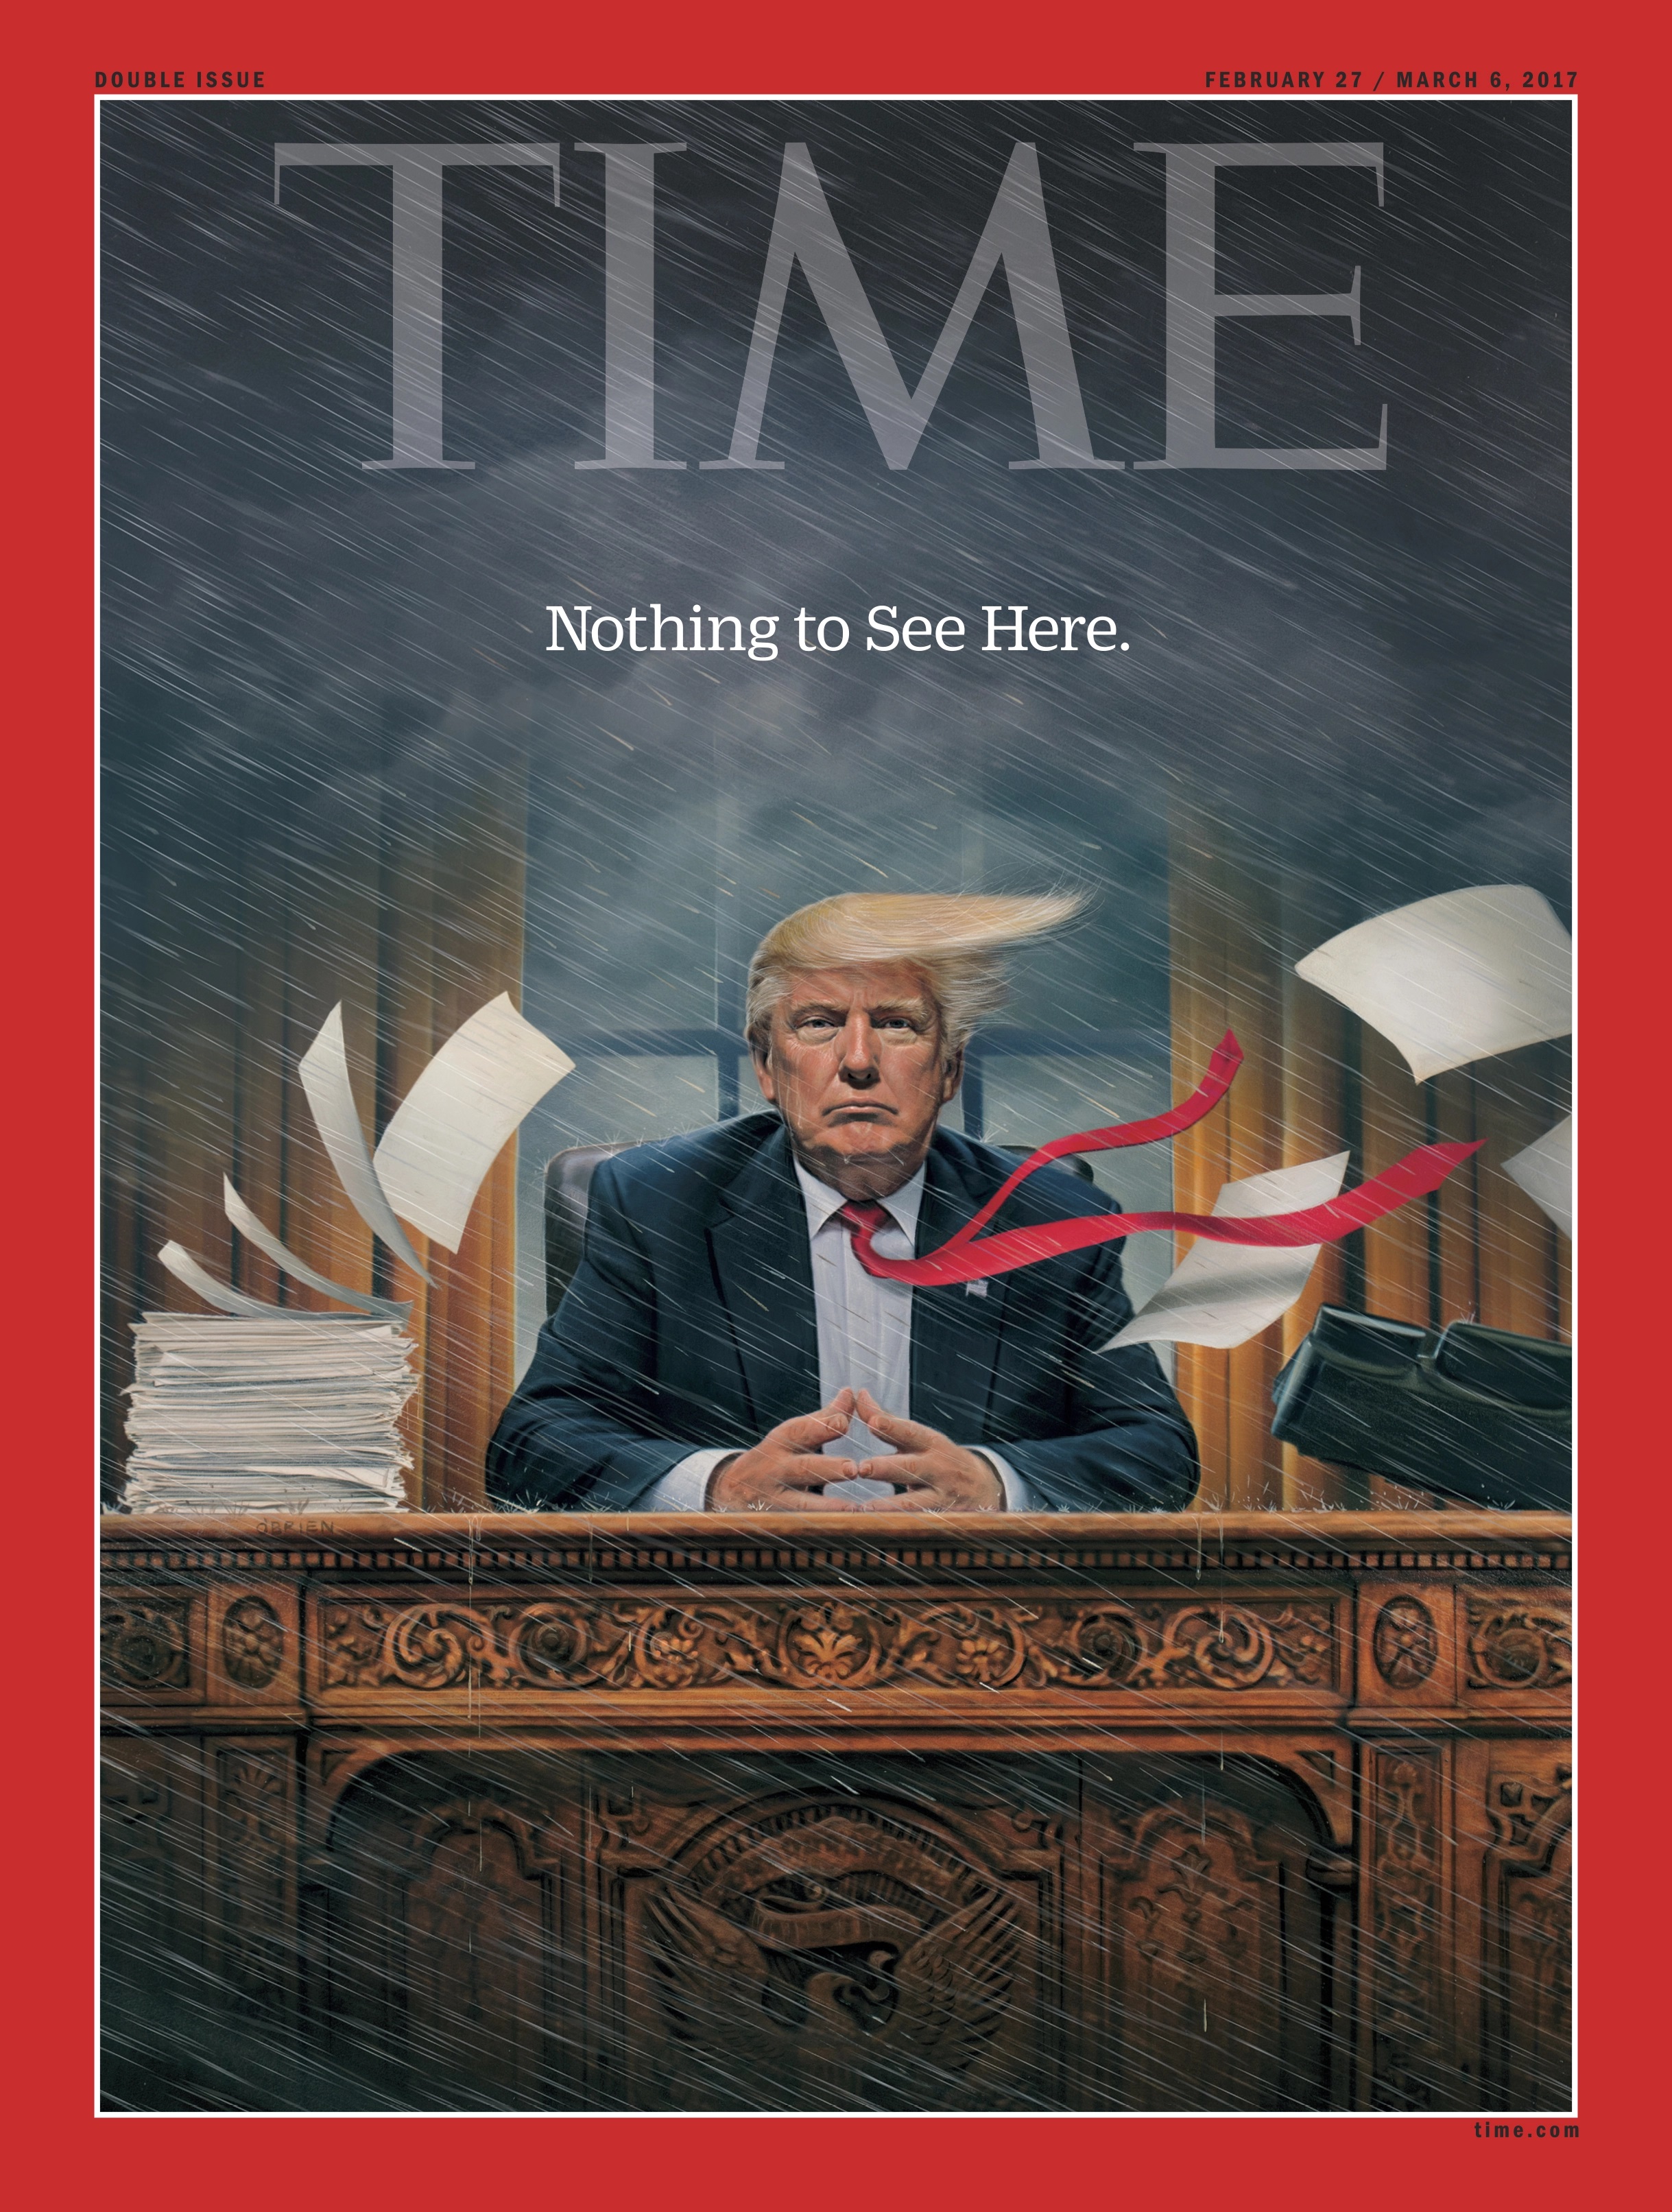 TIME - “Nothing to See Here,” February 27-March 6, 2017